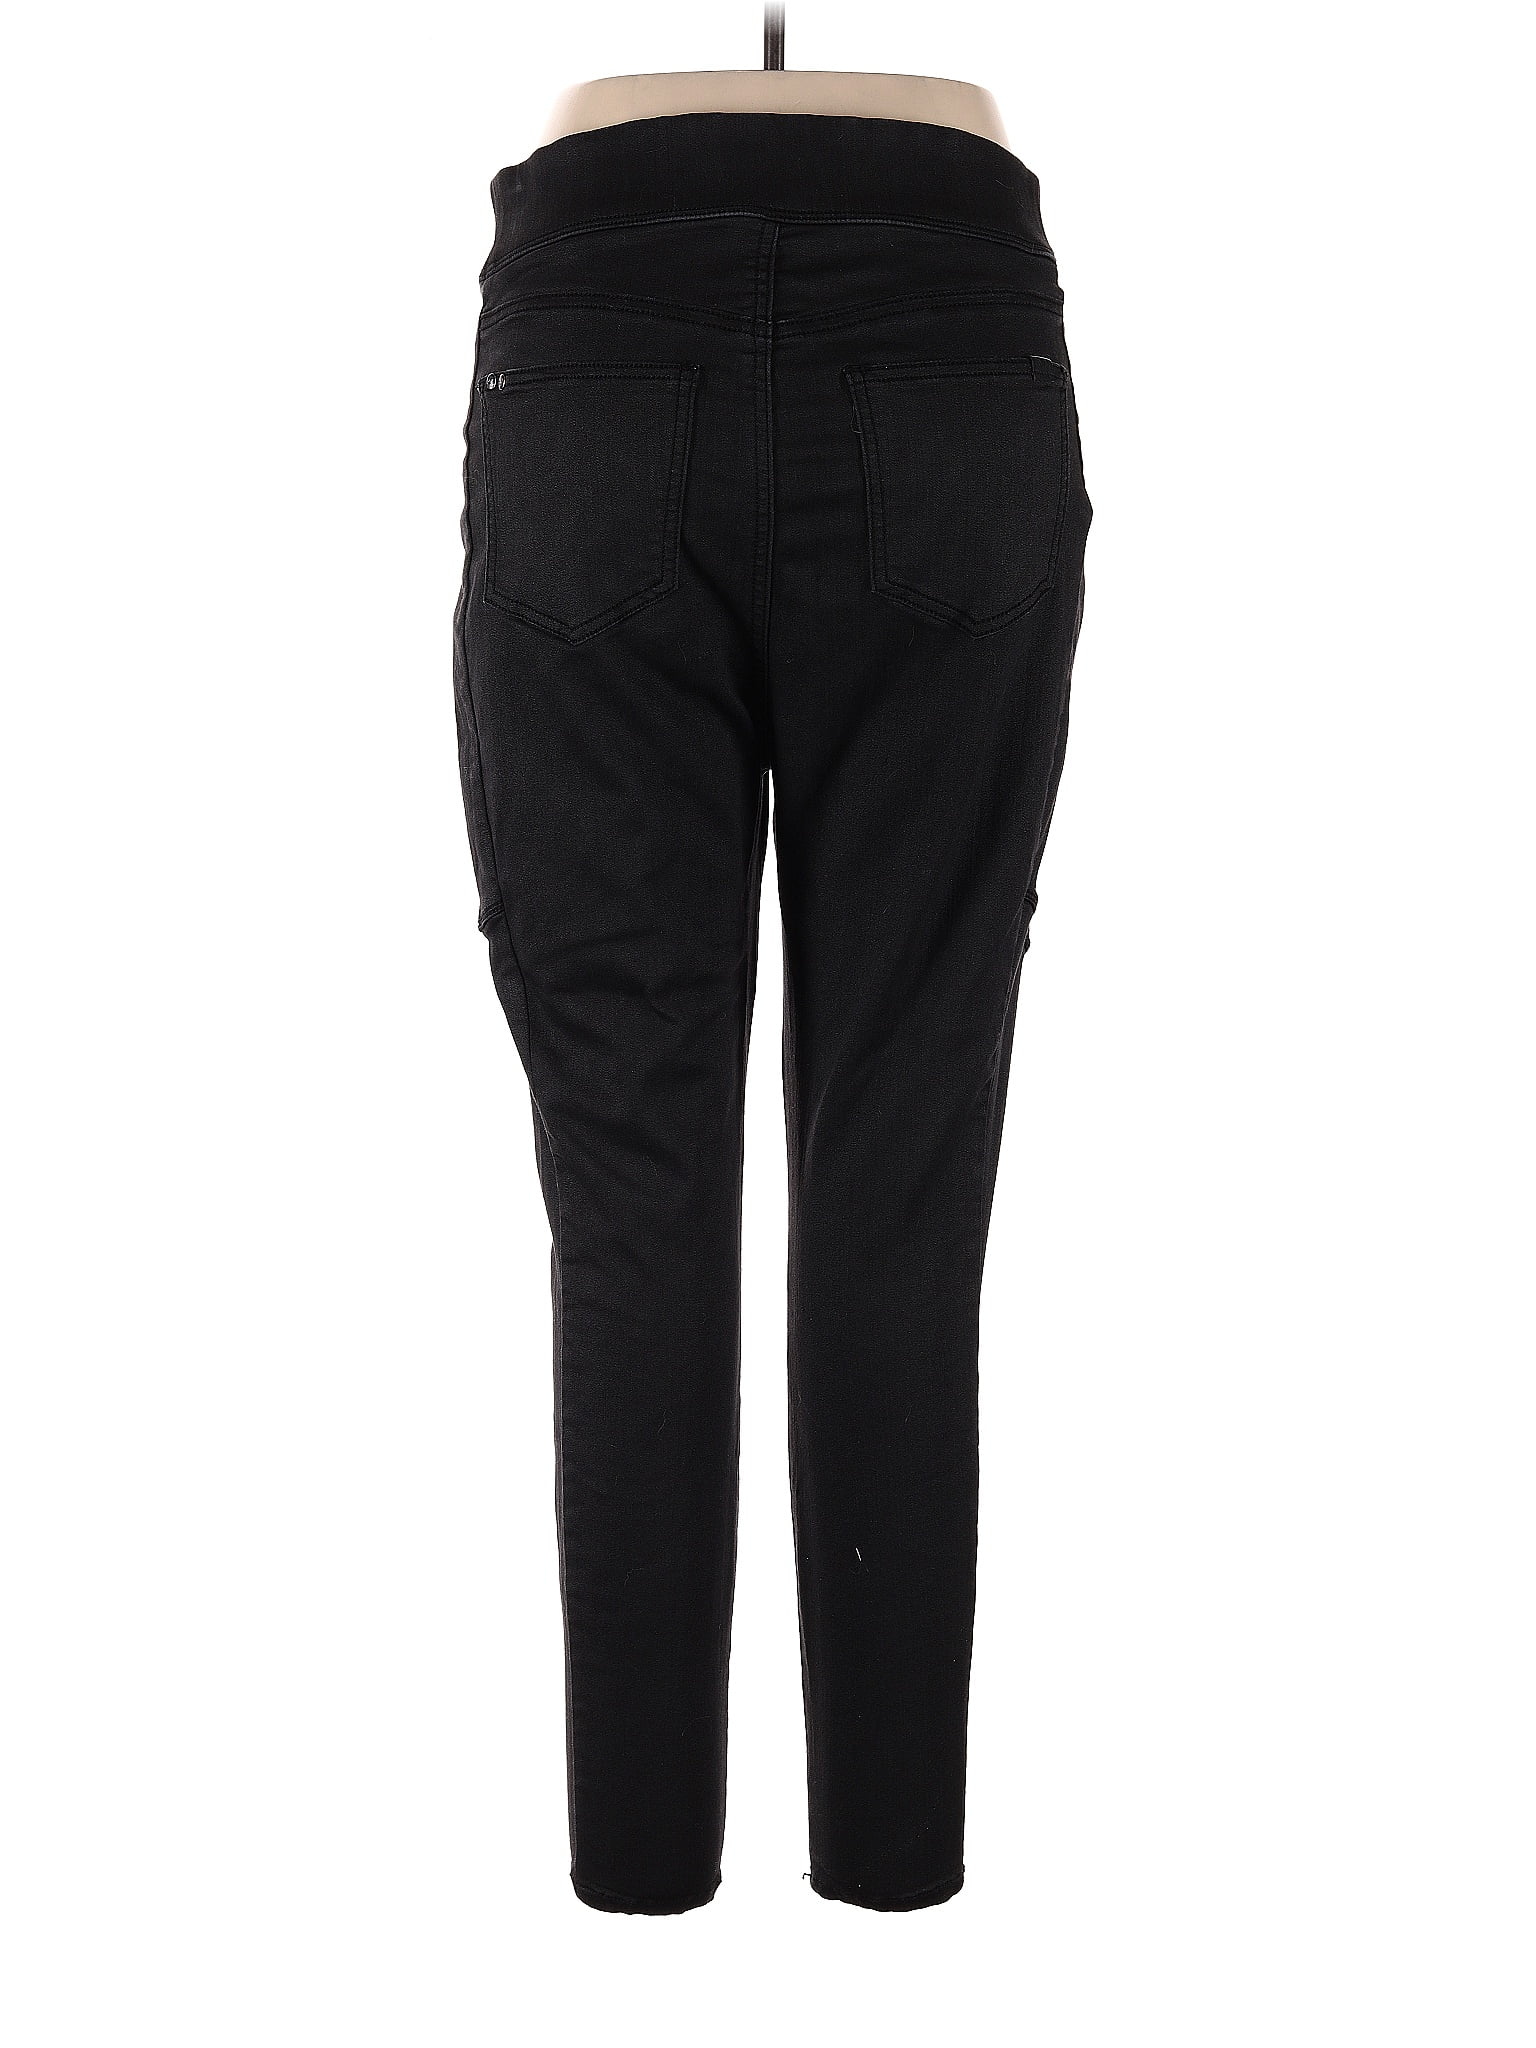 RWN by Rawan NWT 2X Faded Black Curvy Skinny Pull On Ankle Jeggings Jeans